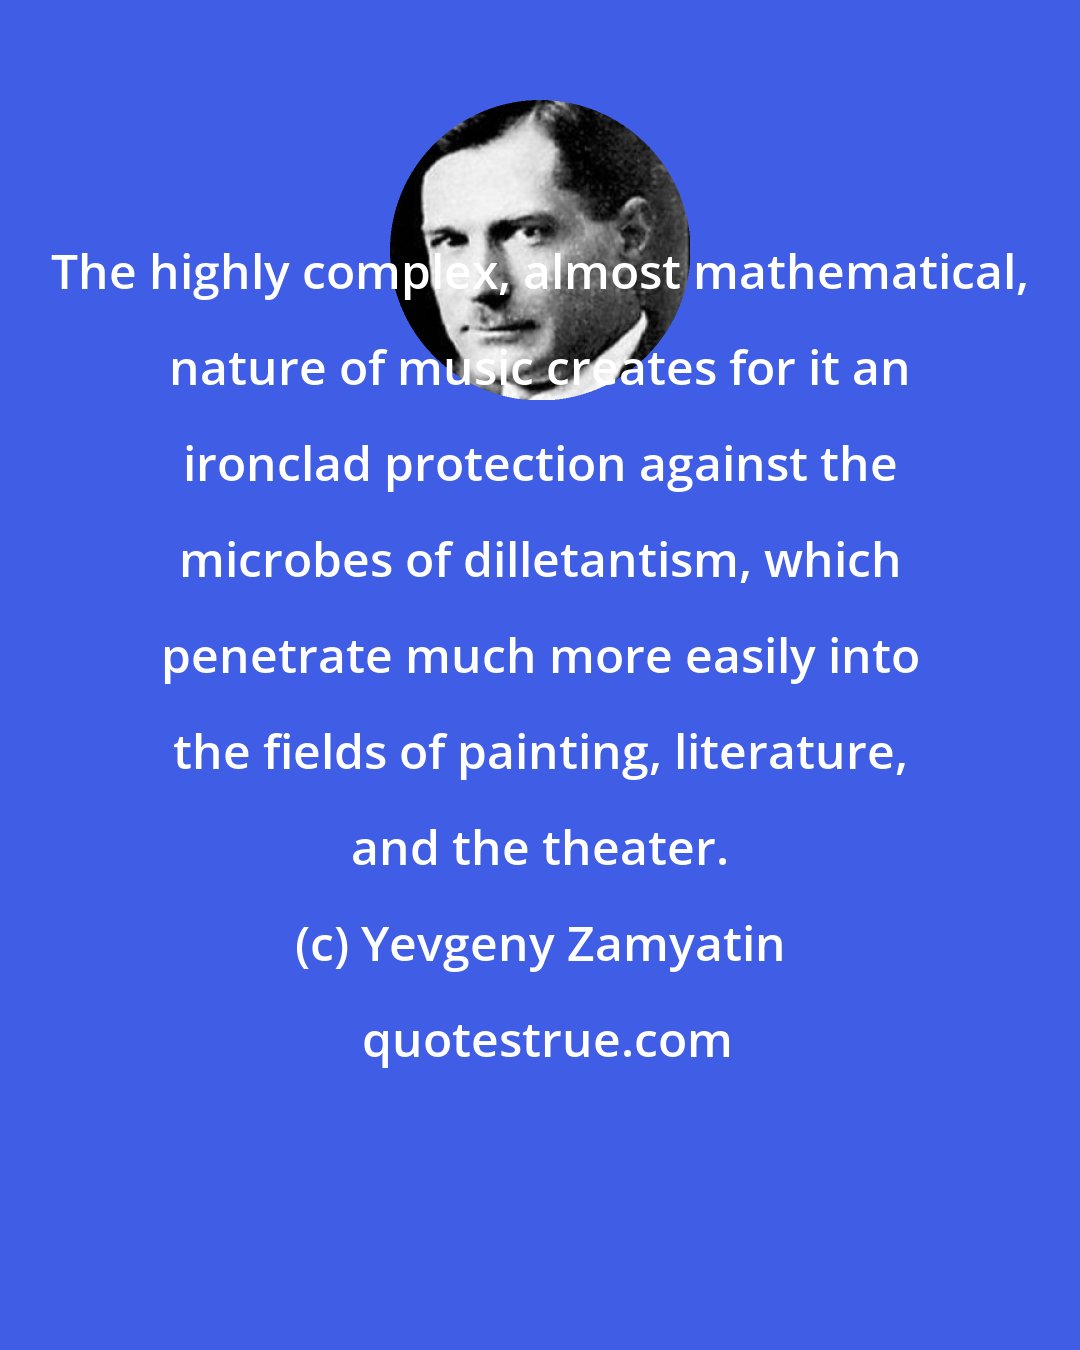 Yevgeny Zamyatin: The highly complex, almost mathematical, nature of music creates for it an ironclad protection against the microbes of dilletantism, which penetrate much more easily into the fields of painting, literature, and the theater.